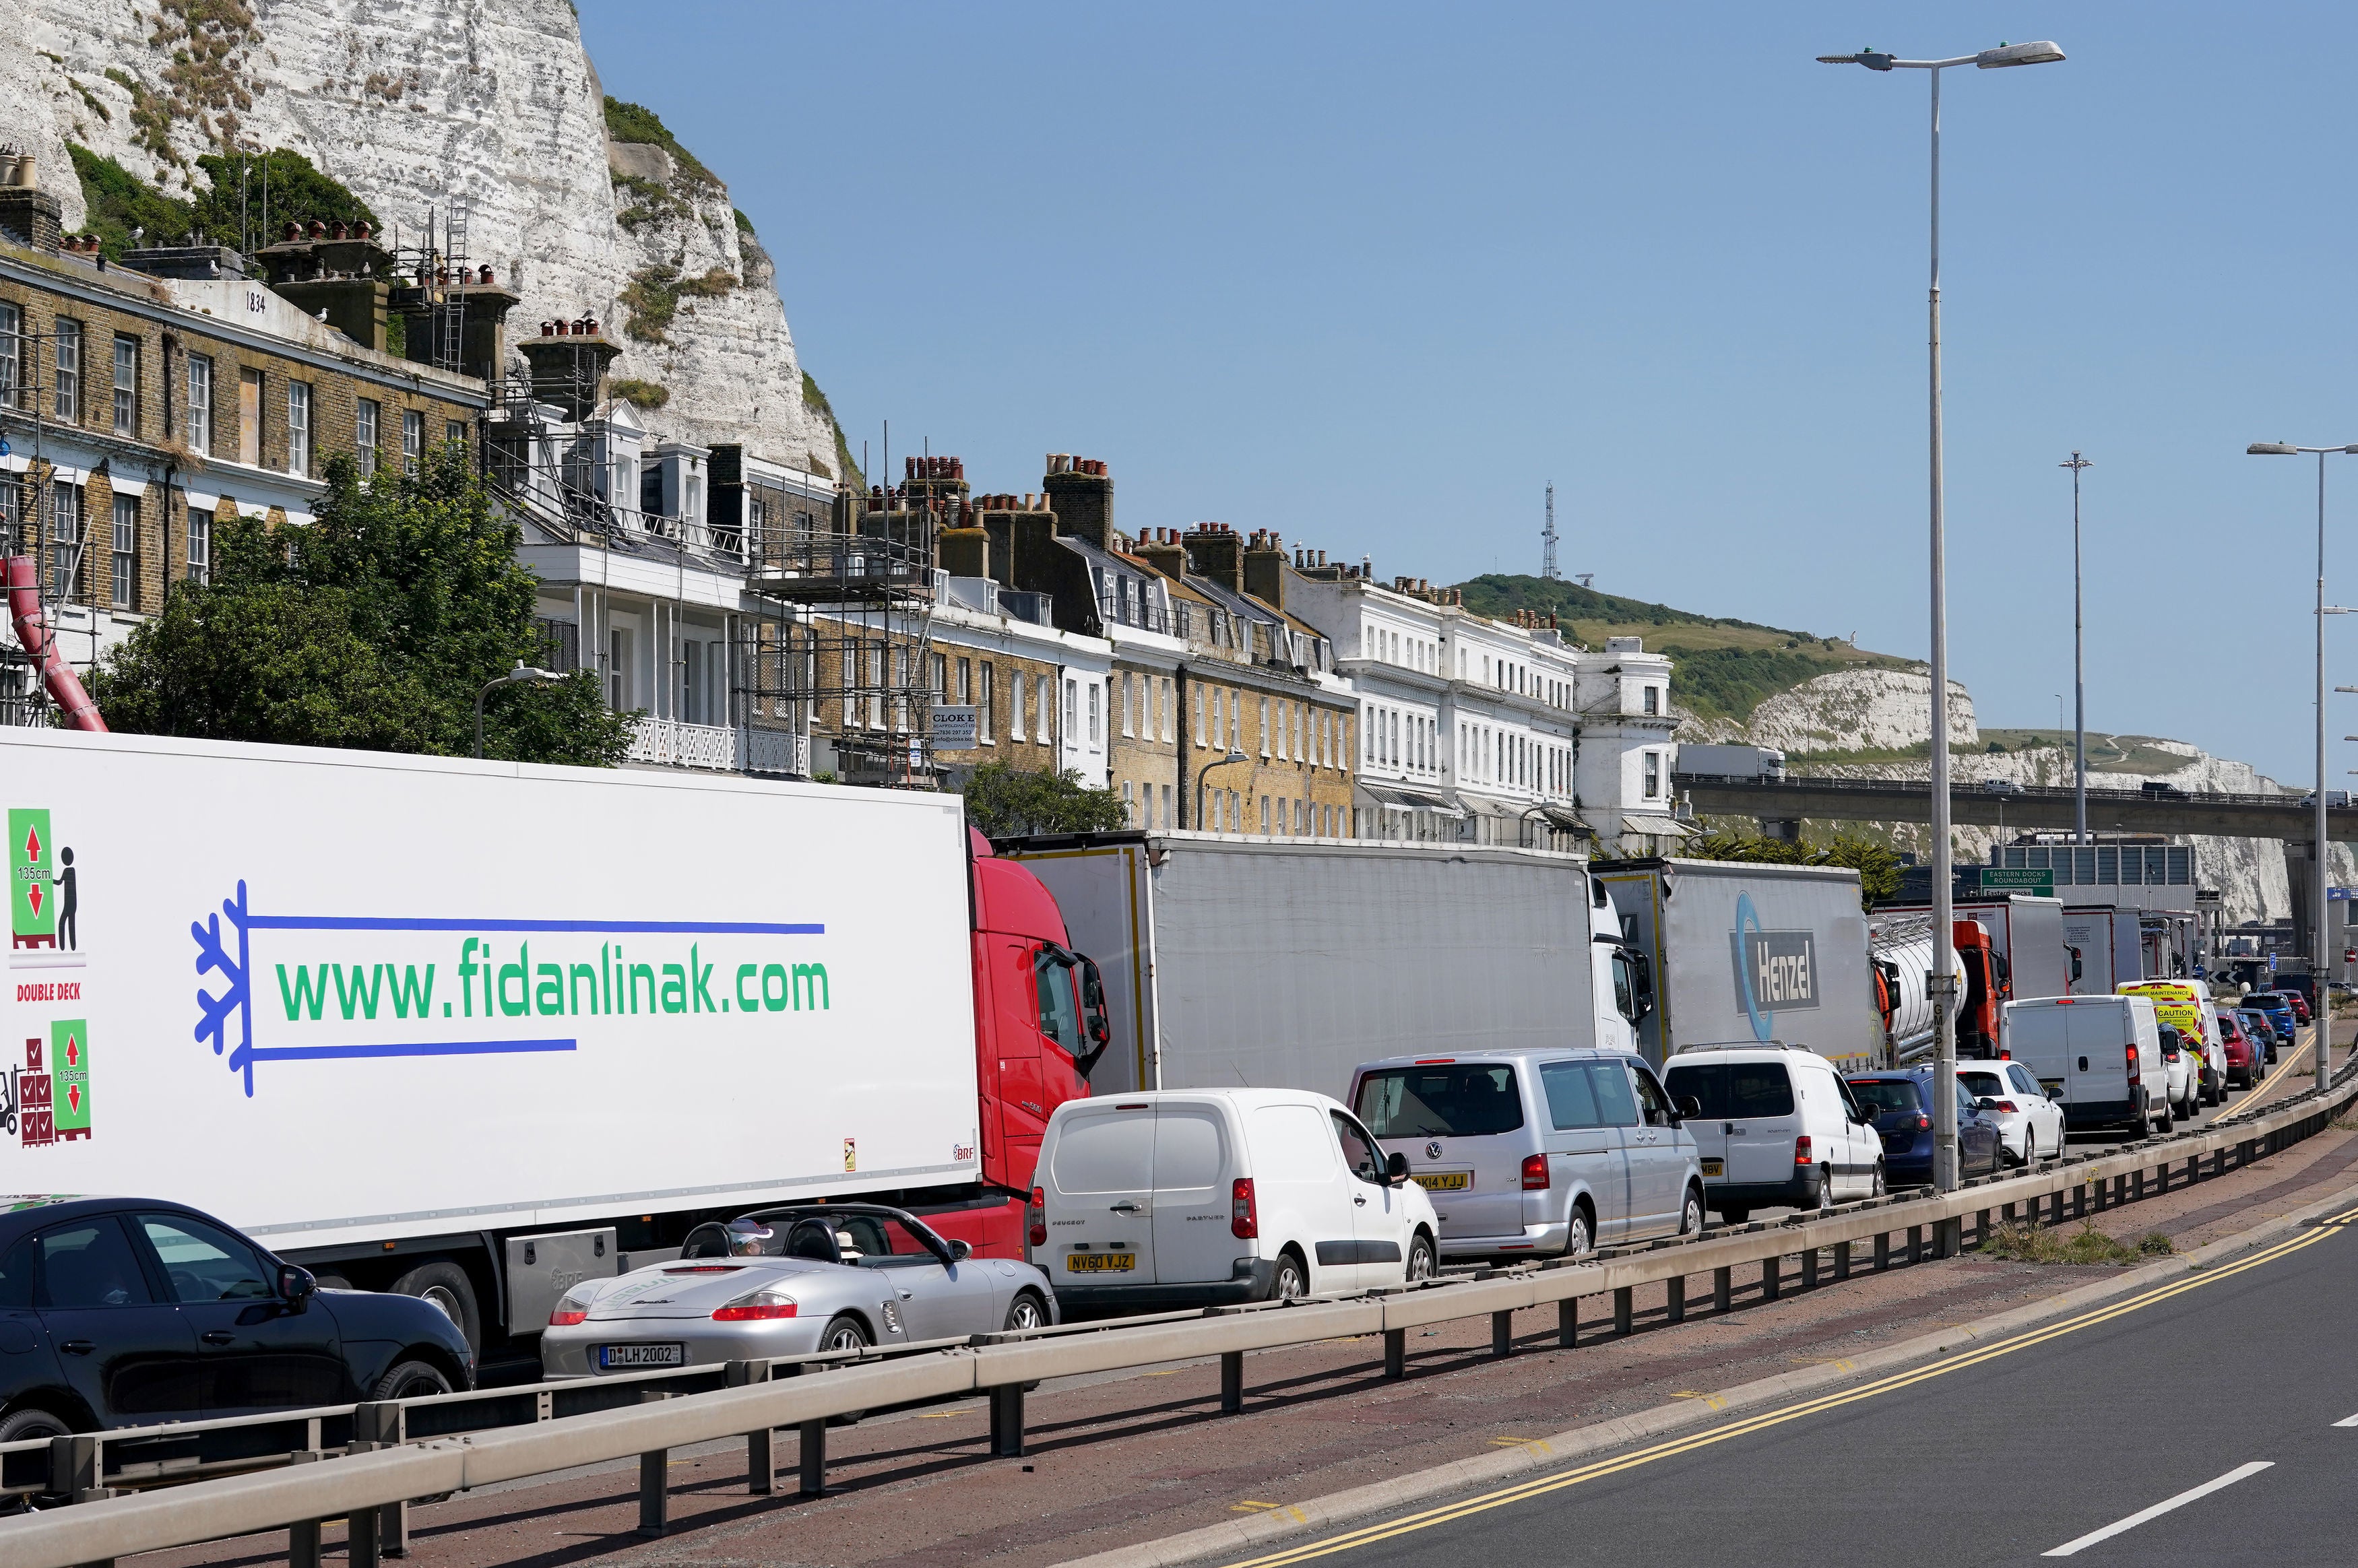 Dover has been hit with waves of disruption due to post-Brexit changes